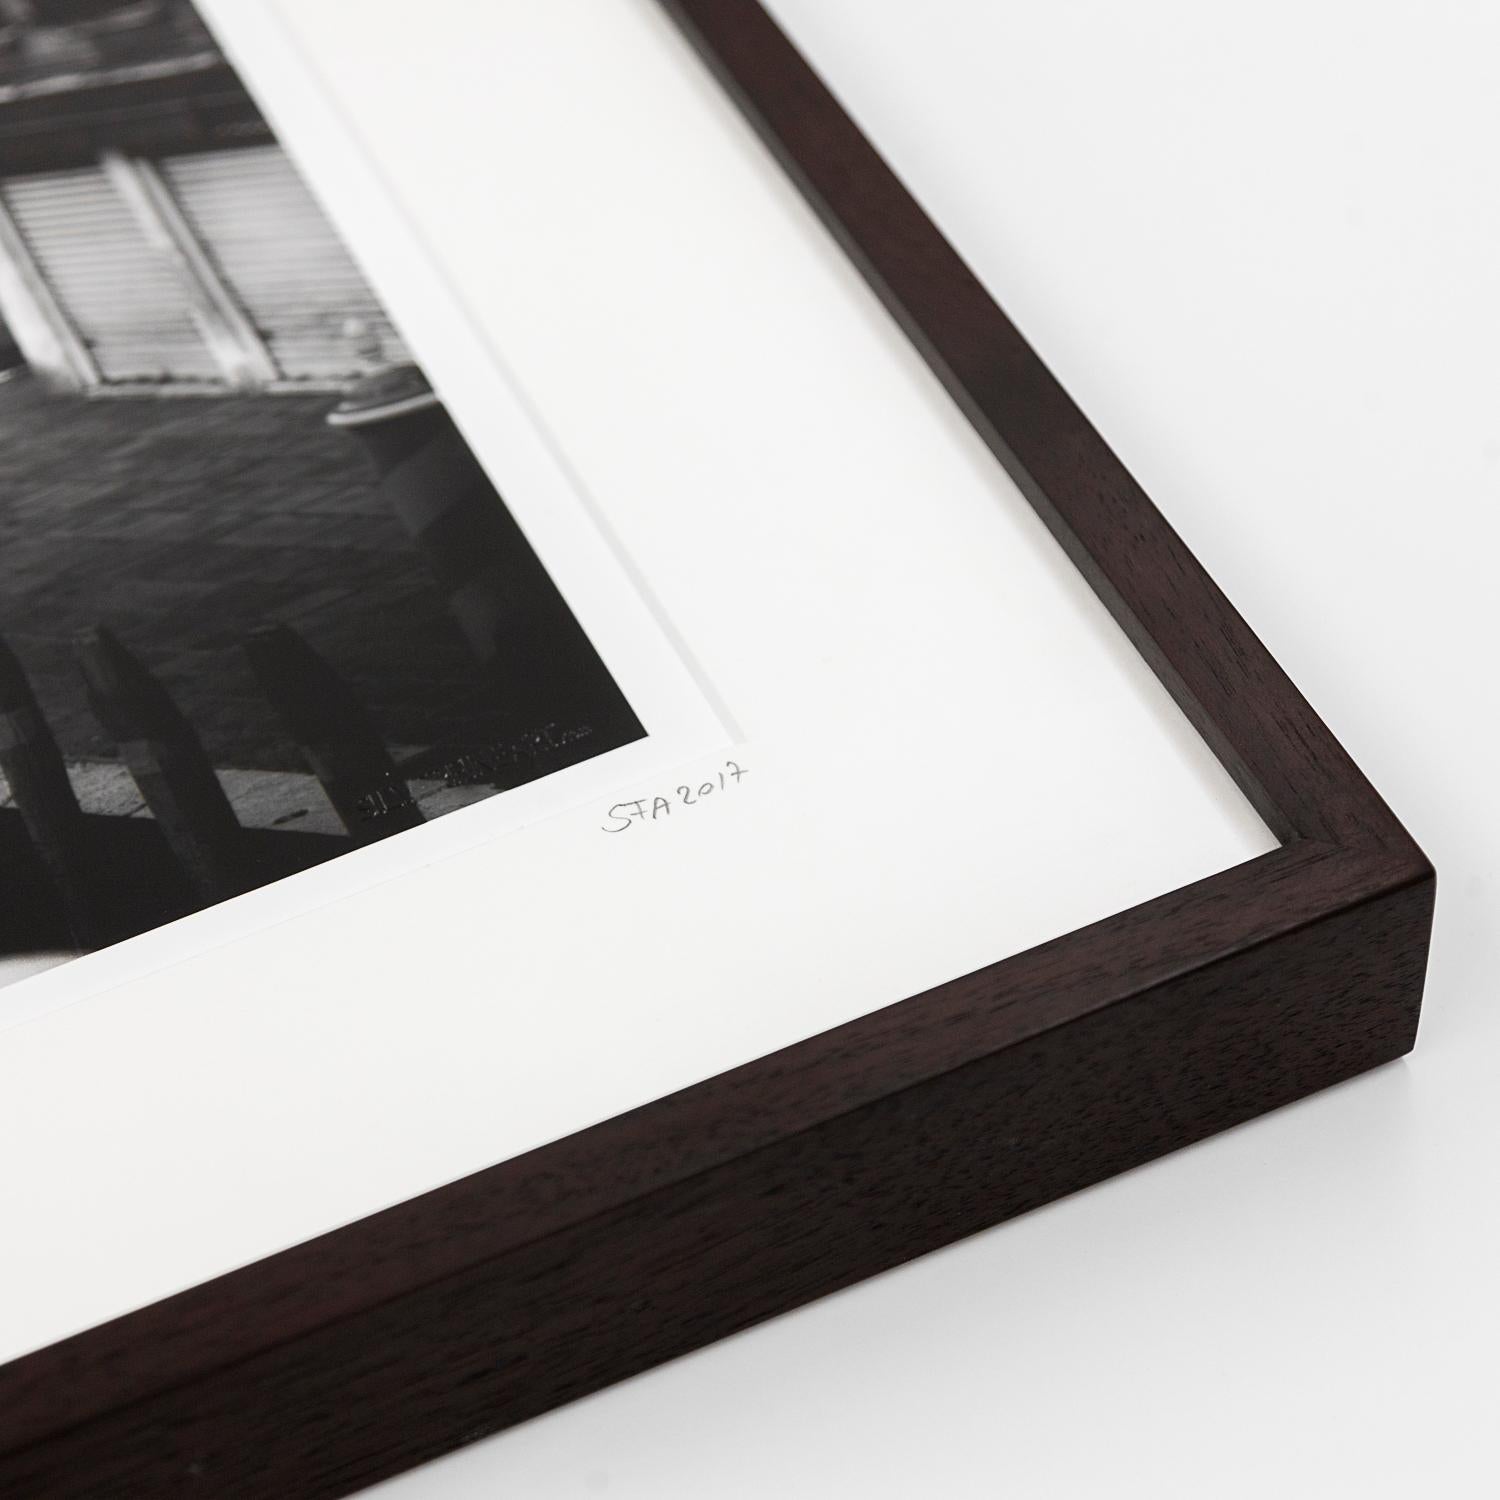 Gerald Berghammer - Limited Edition 1/15
Silver Gelatin Prints, Selenium Toned, Printed 2017
Signed, numbered, dated by Artis.
Handmade wood frame, dark-brown, natural white archival Passepartout, anti-reflection white glass, UV 70, metal corners